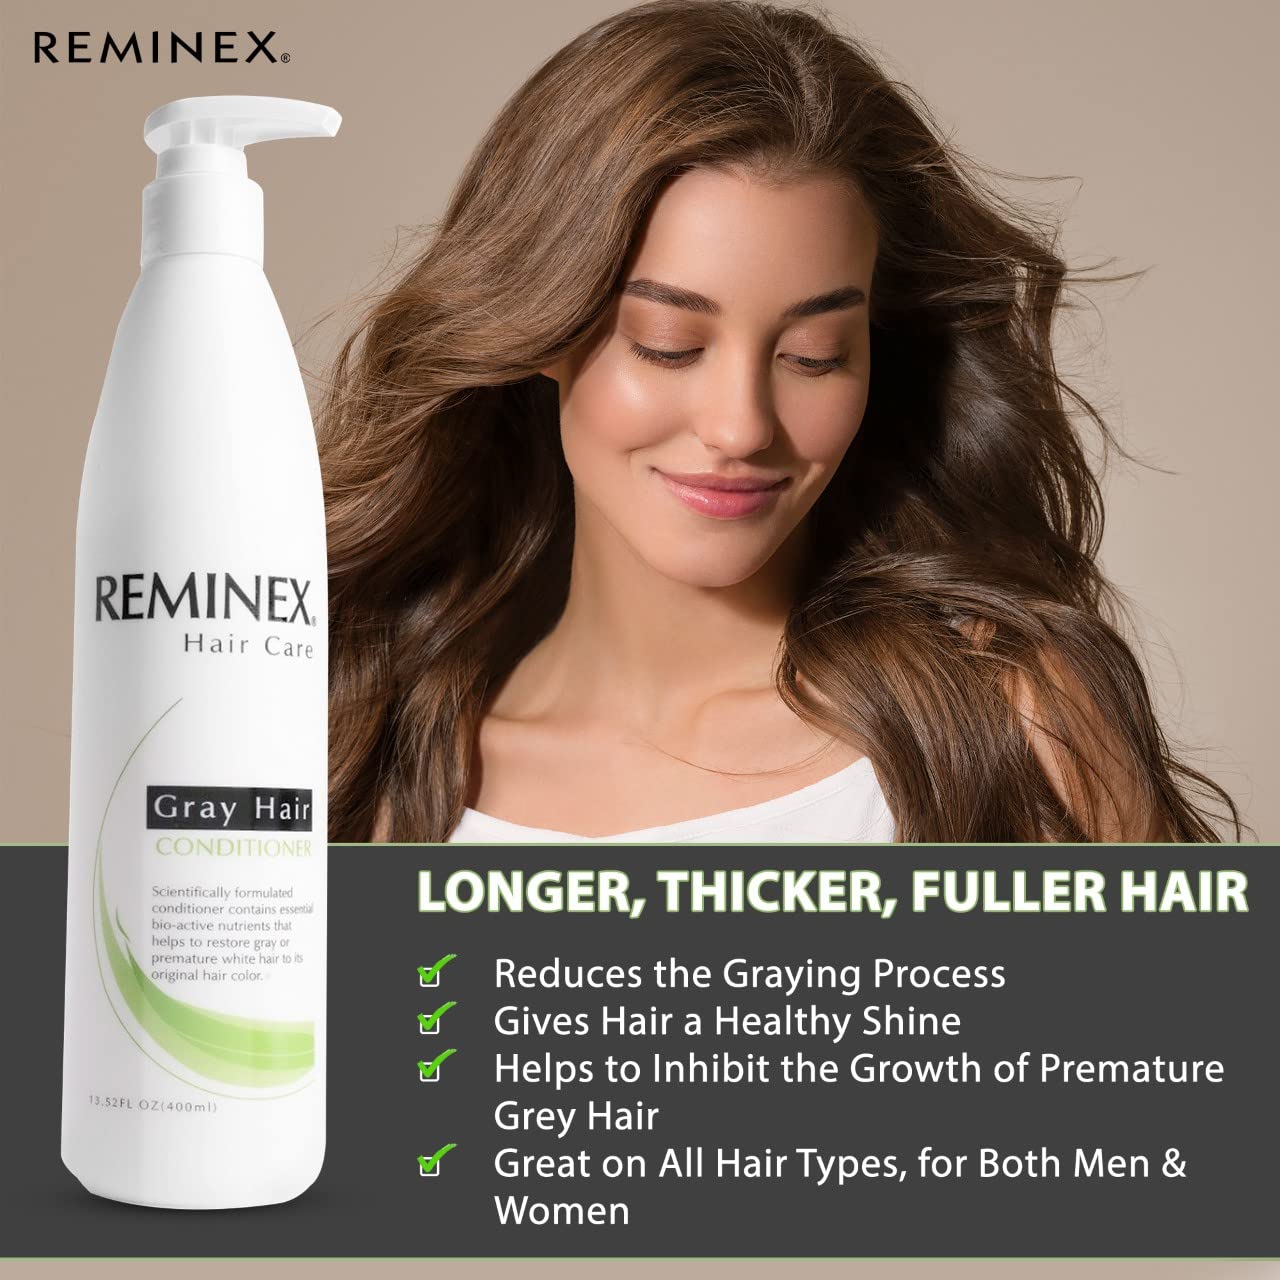 Amazon.com : Reminex Grey Hair Conditioner To Restore Gray Hair and White Hair To Their Original Hair Color. : Beauty & Personal Care